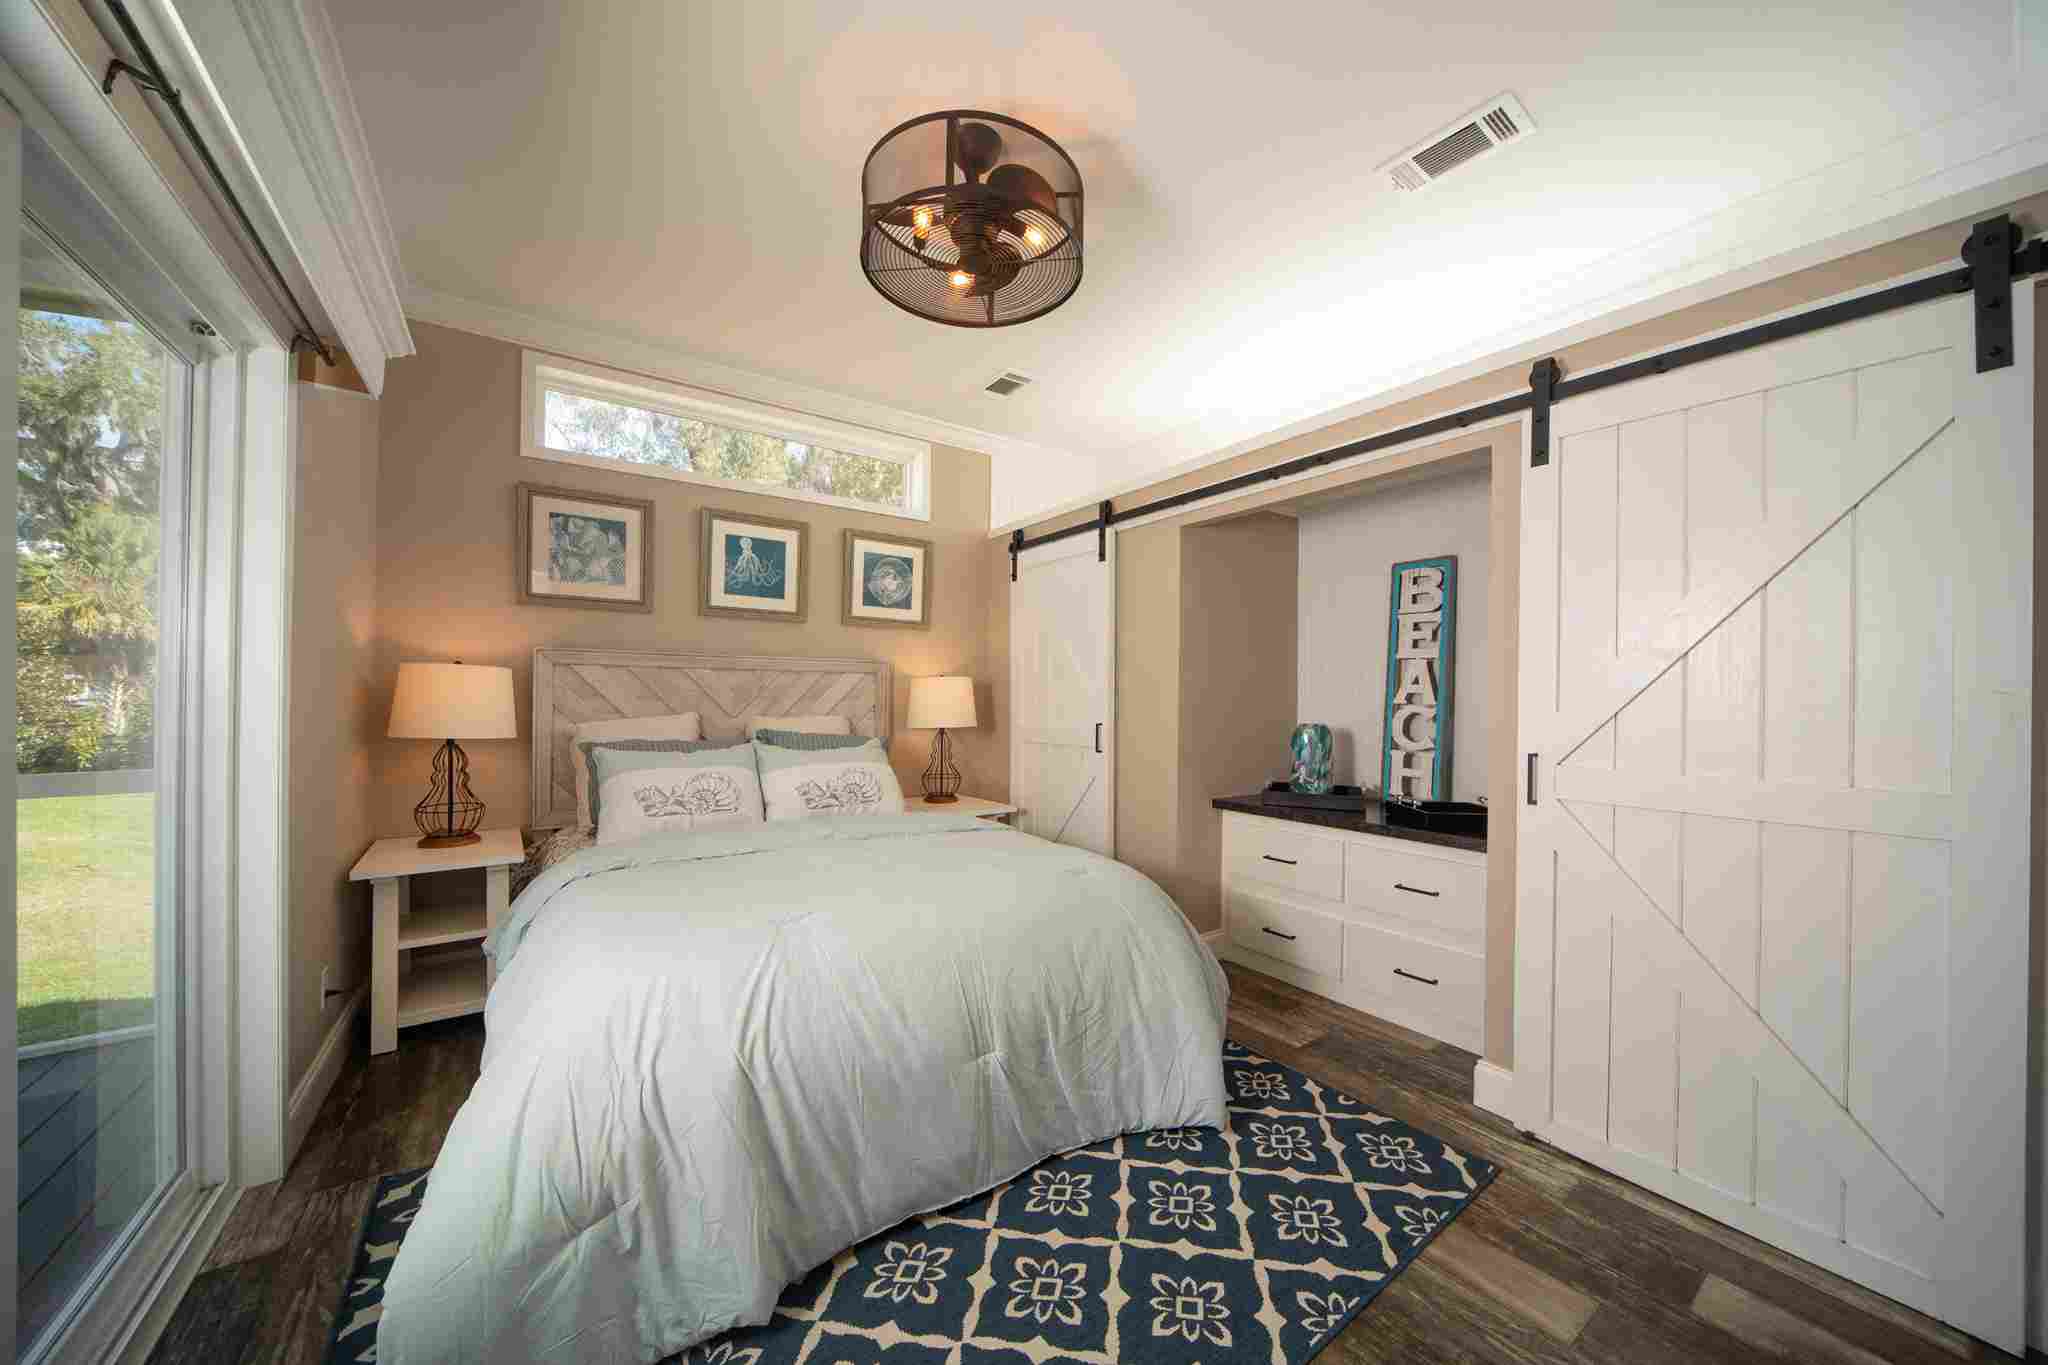 Lakeshore quick move-in homes are the perfect route for someone looking to see their home on their lot before purchasing. Unique to our quick move-ins, you can head over to Lakeshore and see the home before making the decision to buy! Visualize your furniture and décor in the space you’ll soon call home. Because these homes are pre-designed, the moving process is expedited, allowing you to move in as soon as possible! Right now, Lakeshore quick move-ins are on sale, and these are prices that won’t come around again. Scroll through to see some of the gorgeous homes we have on site now! Altamonte, Homesite 174 Features a split bedroom floor plan, with the master and guest bedrooms on opposite sides of the home. This is perfect for anyone who loves to host friends and family, ensuring quiet and privacy when you and your guests retreat to your rooms. Equipped with a very generous screened-in deck on the side of the home. This space adds on so much more living area to the home. It’s fit for outdoor dining, an outdoor living set or the new space for your favorite hobby. Experience the sunrise like you haven’t before, on your porch or in your home. The tandem windows let the light shine in and brighten up your space. Sebring 2, Homesite 165 Equipped with ample storage in the master bedroom. Two sliding barn-door closets separated by extra shelves allow for a place for all the things you need. If that’s not enough, find an extra closet just outside the door to the master! Luxurious walk-in shower in the bathroom! Two screened-in decks along the front and back of the home. The back porch is accessible through the master bedroom, becoming your private oasis. Sebring, Homesite 167 Located on a prime lot! This home is only neighbored on one side, providing its lucky owner with a private side yard. The full-sized master bath features double sinks and a ceramic tile walk-in shower. Find upgraded stainless steel appliances and innovative kitchen storage. Come tour our quick move-in homes and take advantage of the low prices we are offering for a short time! Call 352-702-4918 to book a tour and learn more.